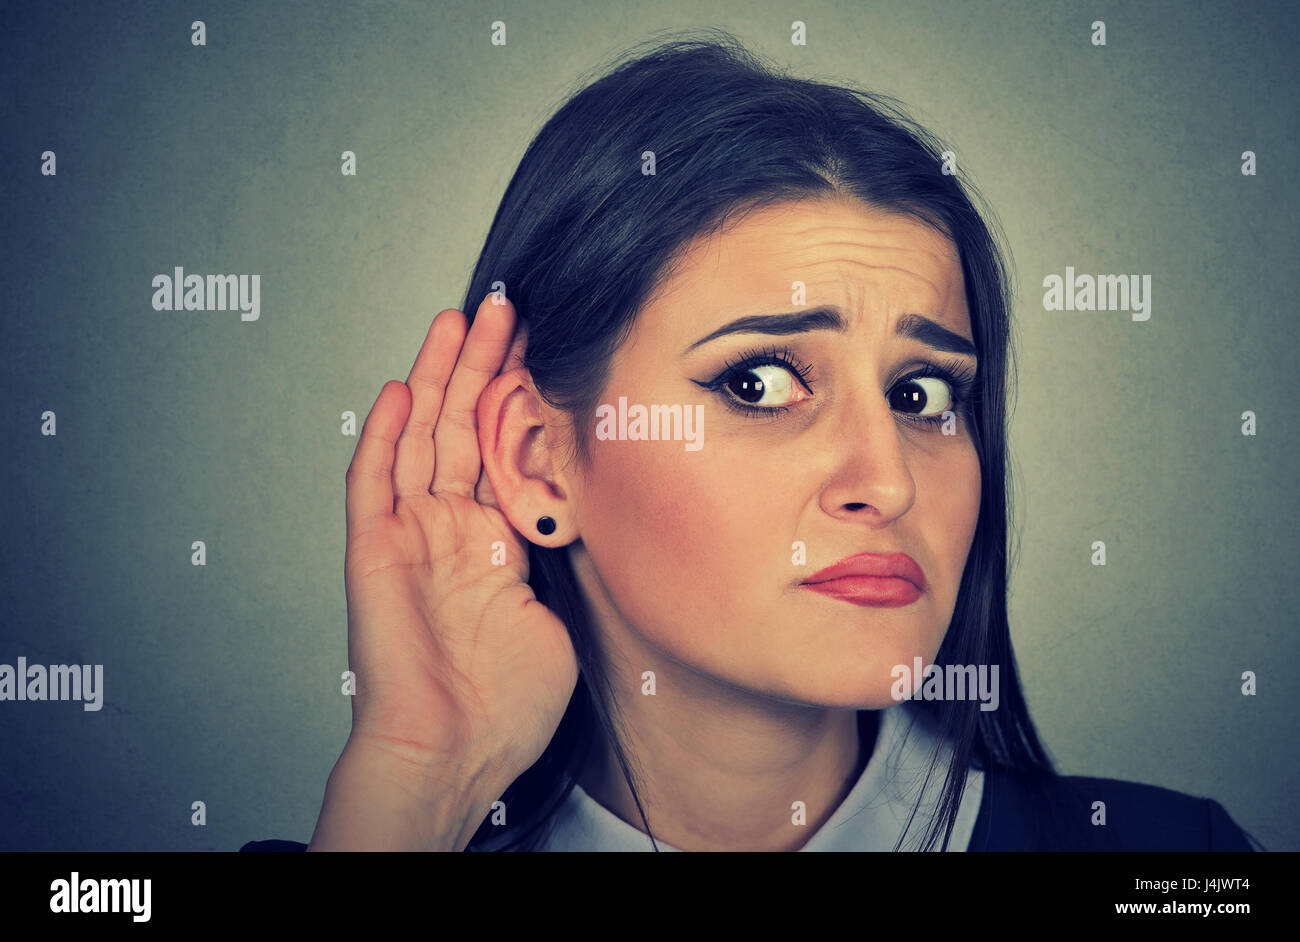 Woman with hand to ear gesture listening carefully Stock Photo